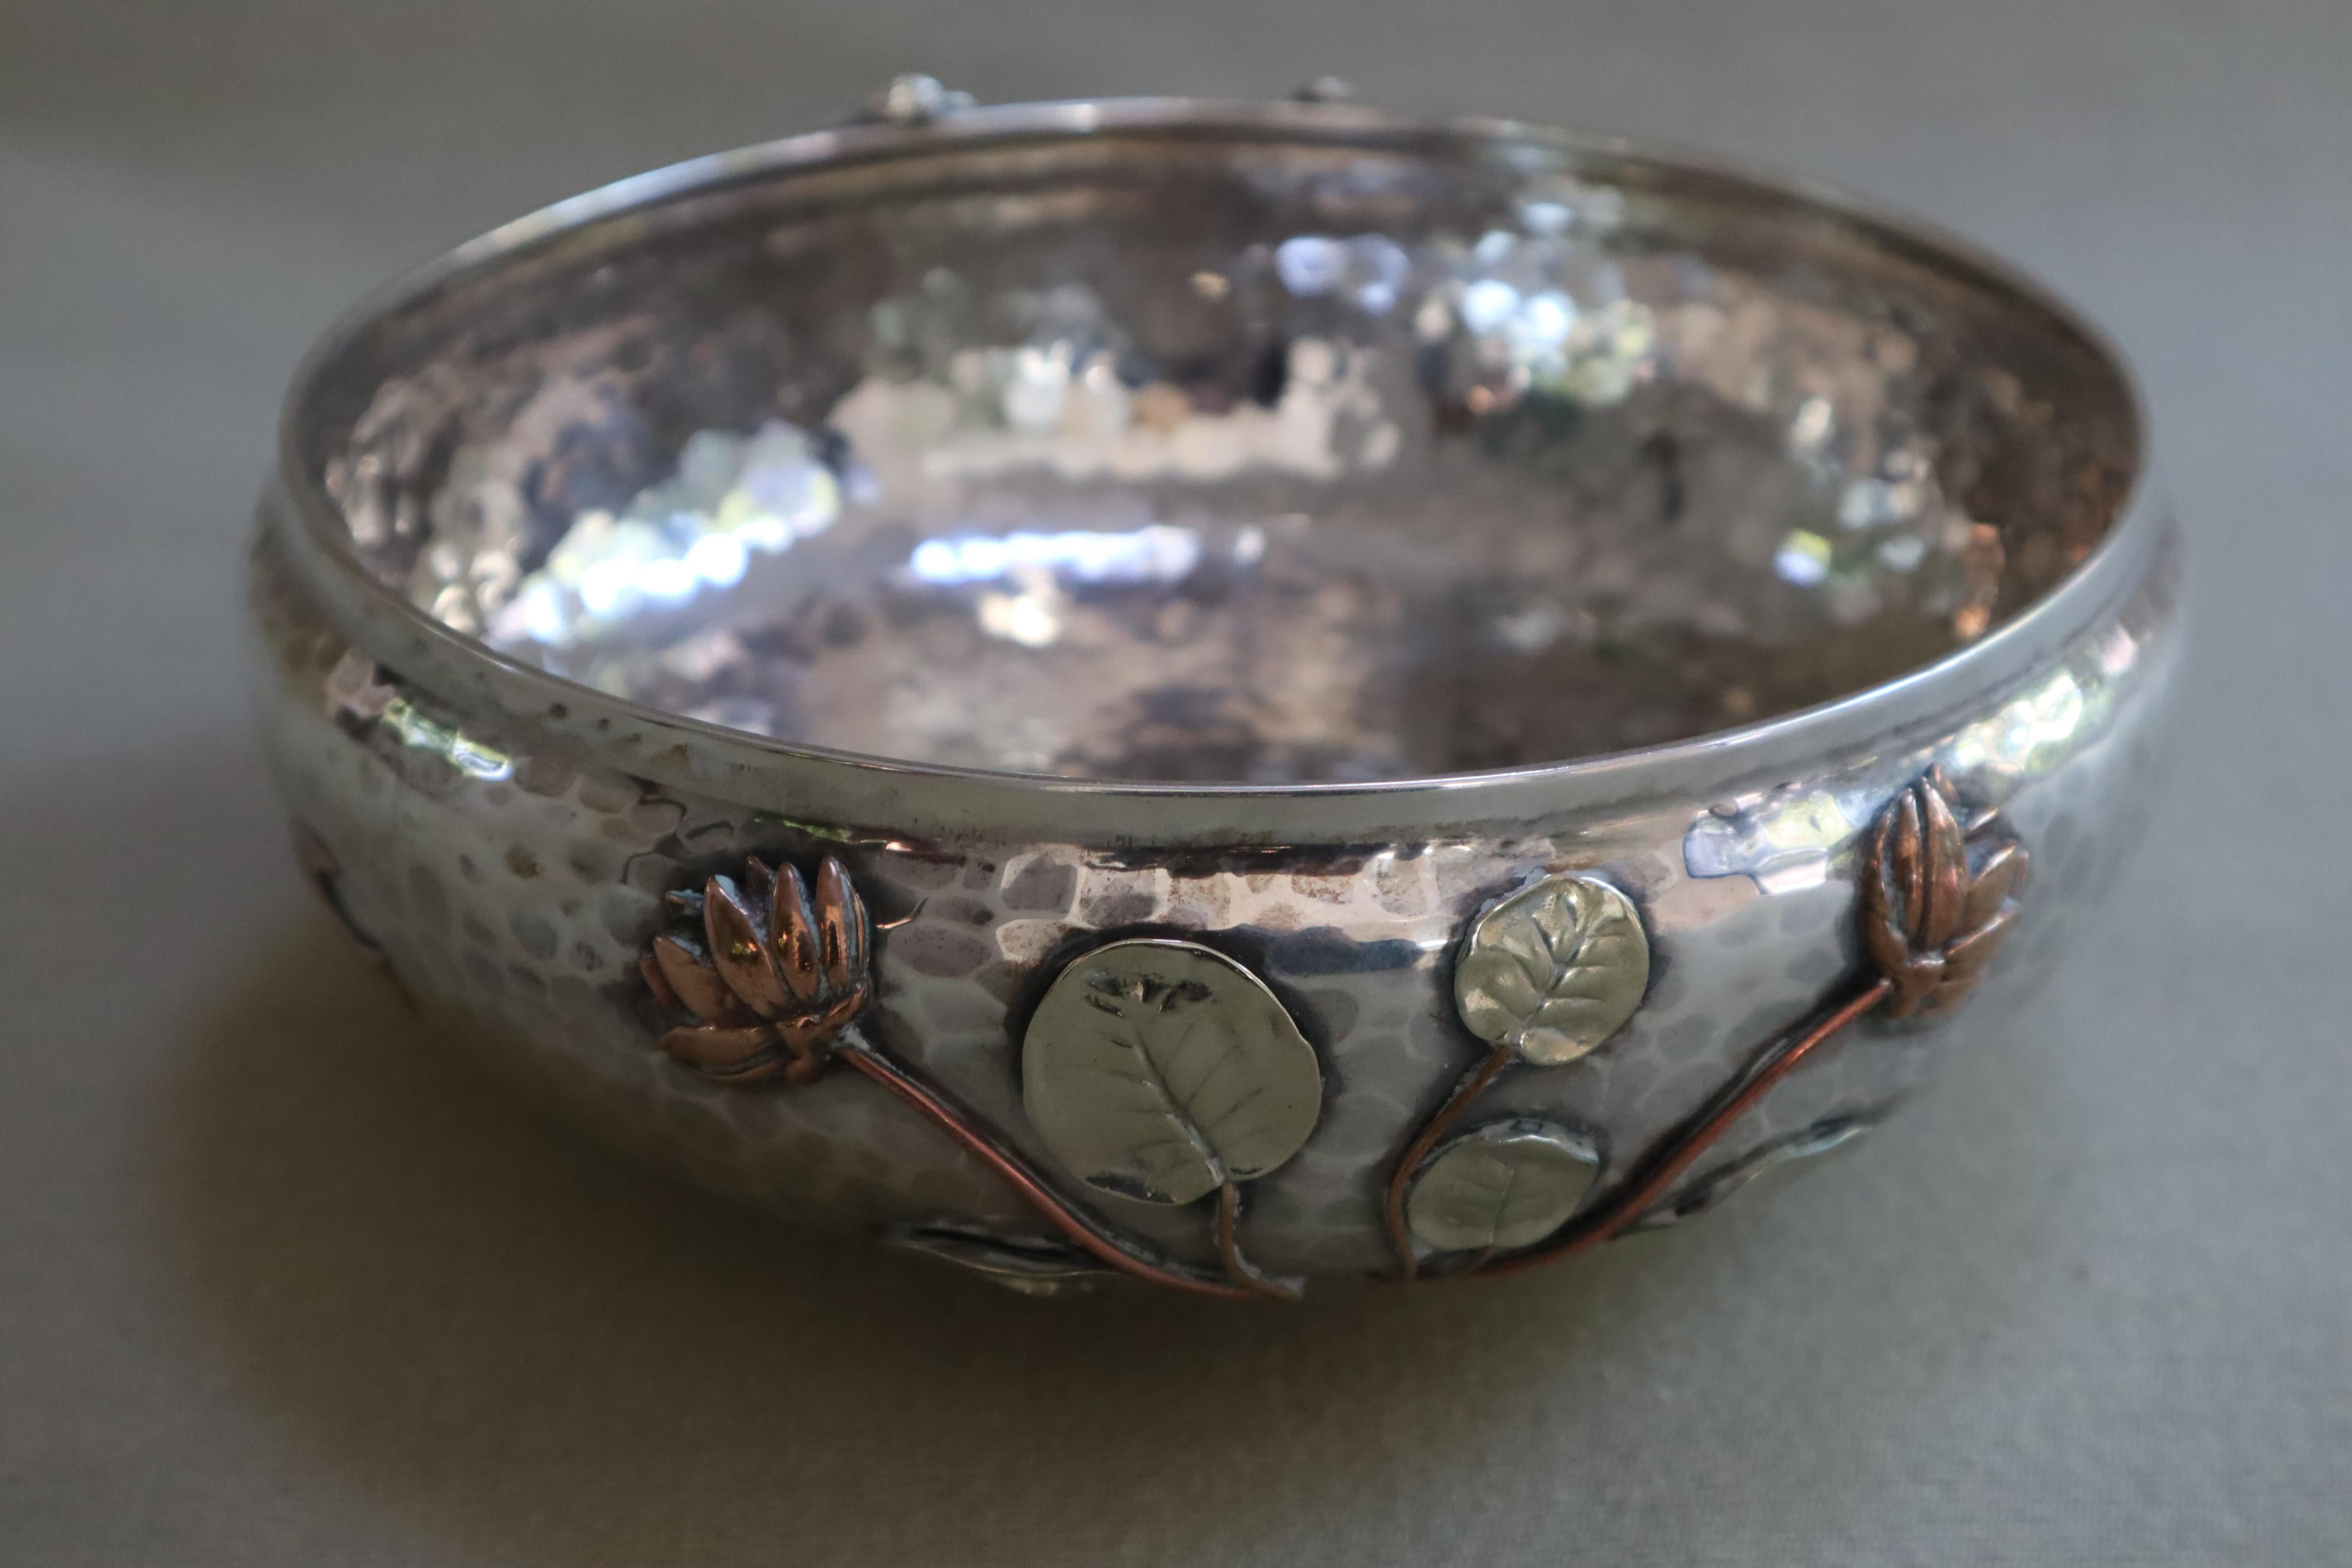 Gorham (Rhode Island) mixed metal on sterling Aesthetic Movement bowl hallmarked and dated N for 1881.

Hammered background with asian floral motifs.

